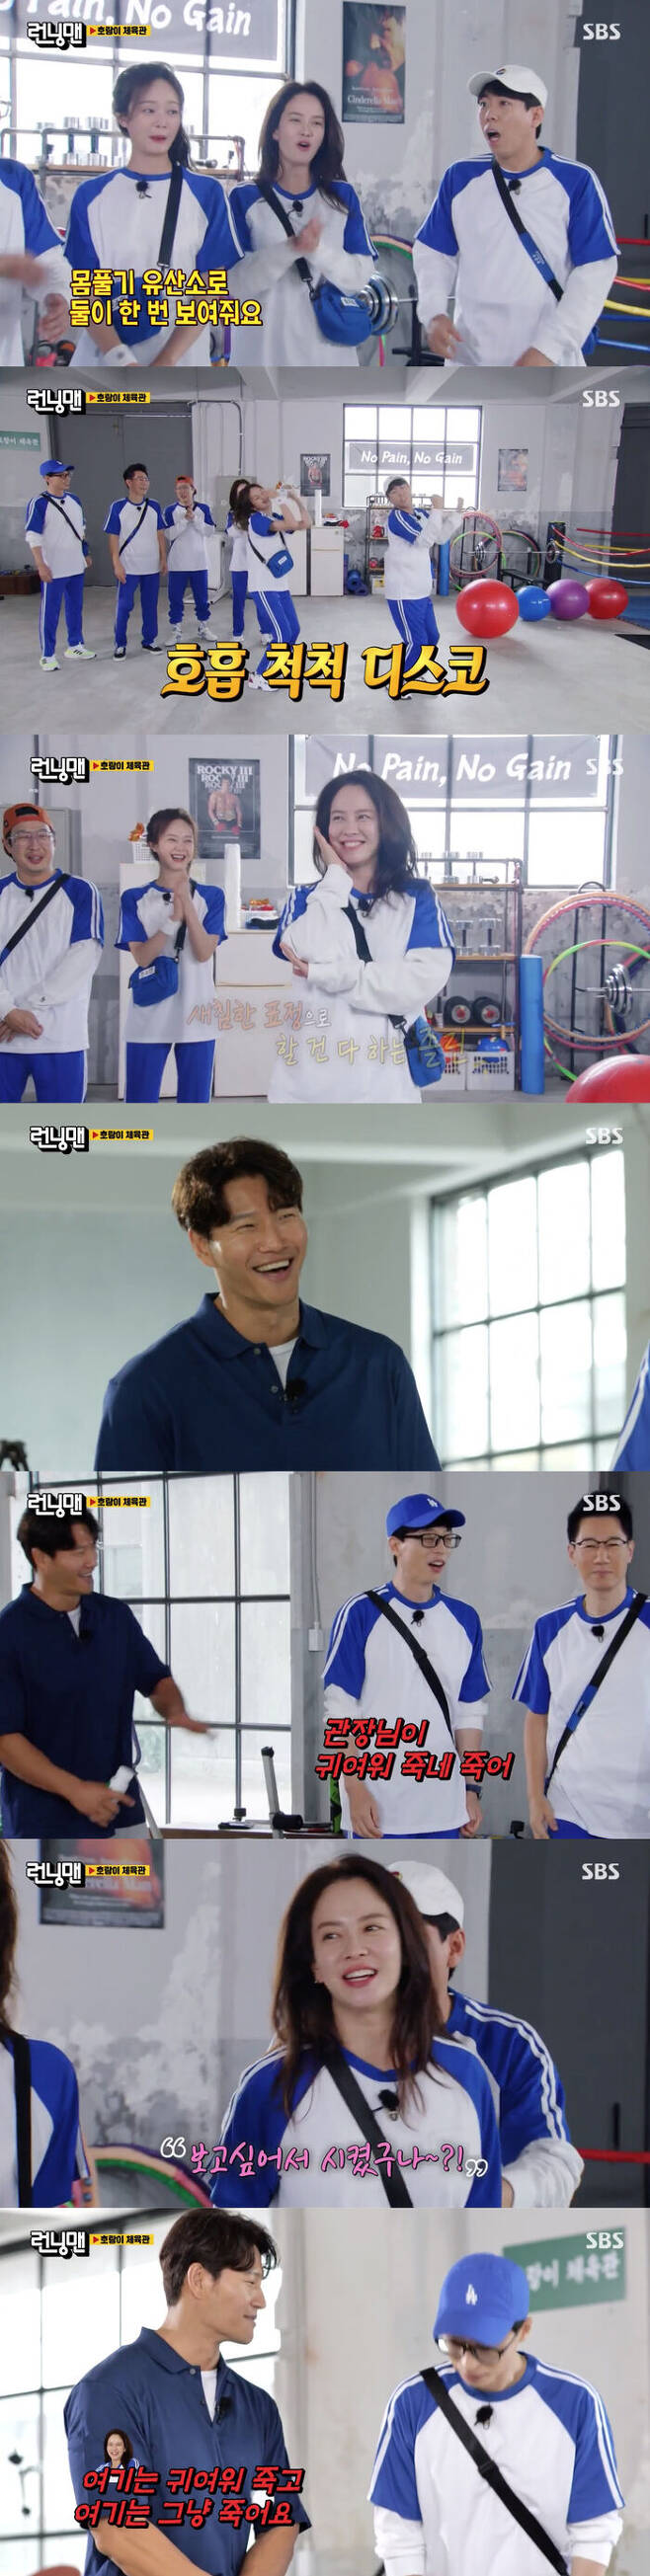 Kim Jong-kook smiled at Song Ji-hyos Batoids danceOn SBS Running Man broadcasted on the 19th, Huk-Kwan and National Representative Race was held.Kim Jong-kook, who was divided into the chief director on the day of the broadcast, suddenly asked the members to dance. He said, Please show me as a body-relieving aerobics because you have to release your body before exercise.So, Jeon So-min and Yang Se-chan were embarrassed with their awkward faces; however, when the music came out, they automatically showed their dances and admired them.Kim Jong-kook, who was looking at this with joy, also asked Song Ji-hyo for the Rolin stage.Song Ji-hyo, who showed off the Rolin cover stage at an online fan meeting, played dance with a dazed face after a little buffering.Kim Jong-kook laughed at Song Ji-hyos Batoids dance, and Yoo Jae-Suk continued Kim Jong-kook and Song Ji-hyo love lines today, saying, The director is dead of cute.Then Song Ji-hyo said, Uig.I wanted to see you, he said, once again showing Batoids dance, Kim Jong-kook said, I do not know if Im unwinding, but I feel relaxed. Yoo Jae-Suk quipped, The director died of cute. I saw it. I saw the molar.In the end, Kim Jong-kook laughed by fist-cuffing, saying, Here (Song Ji-hyo) is cut dead and here (Yoo Jae-Suk) is just dead.